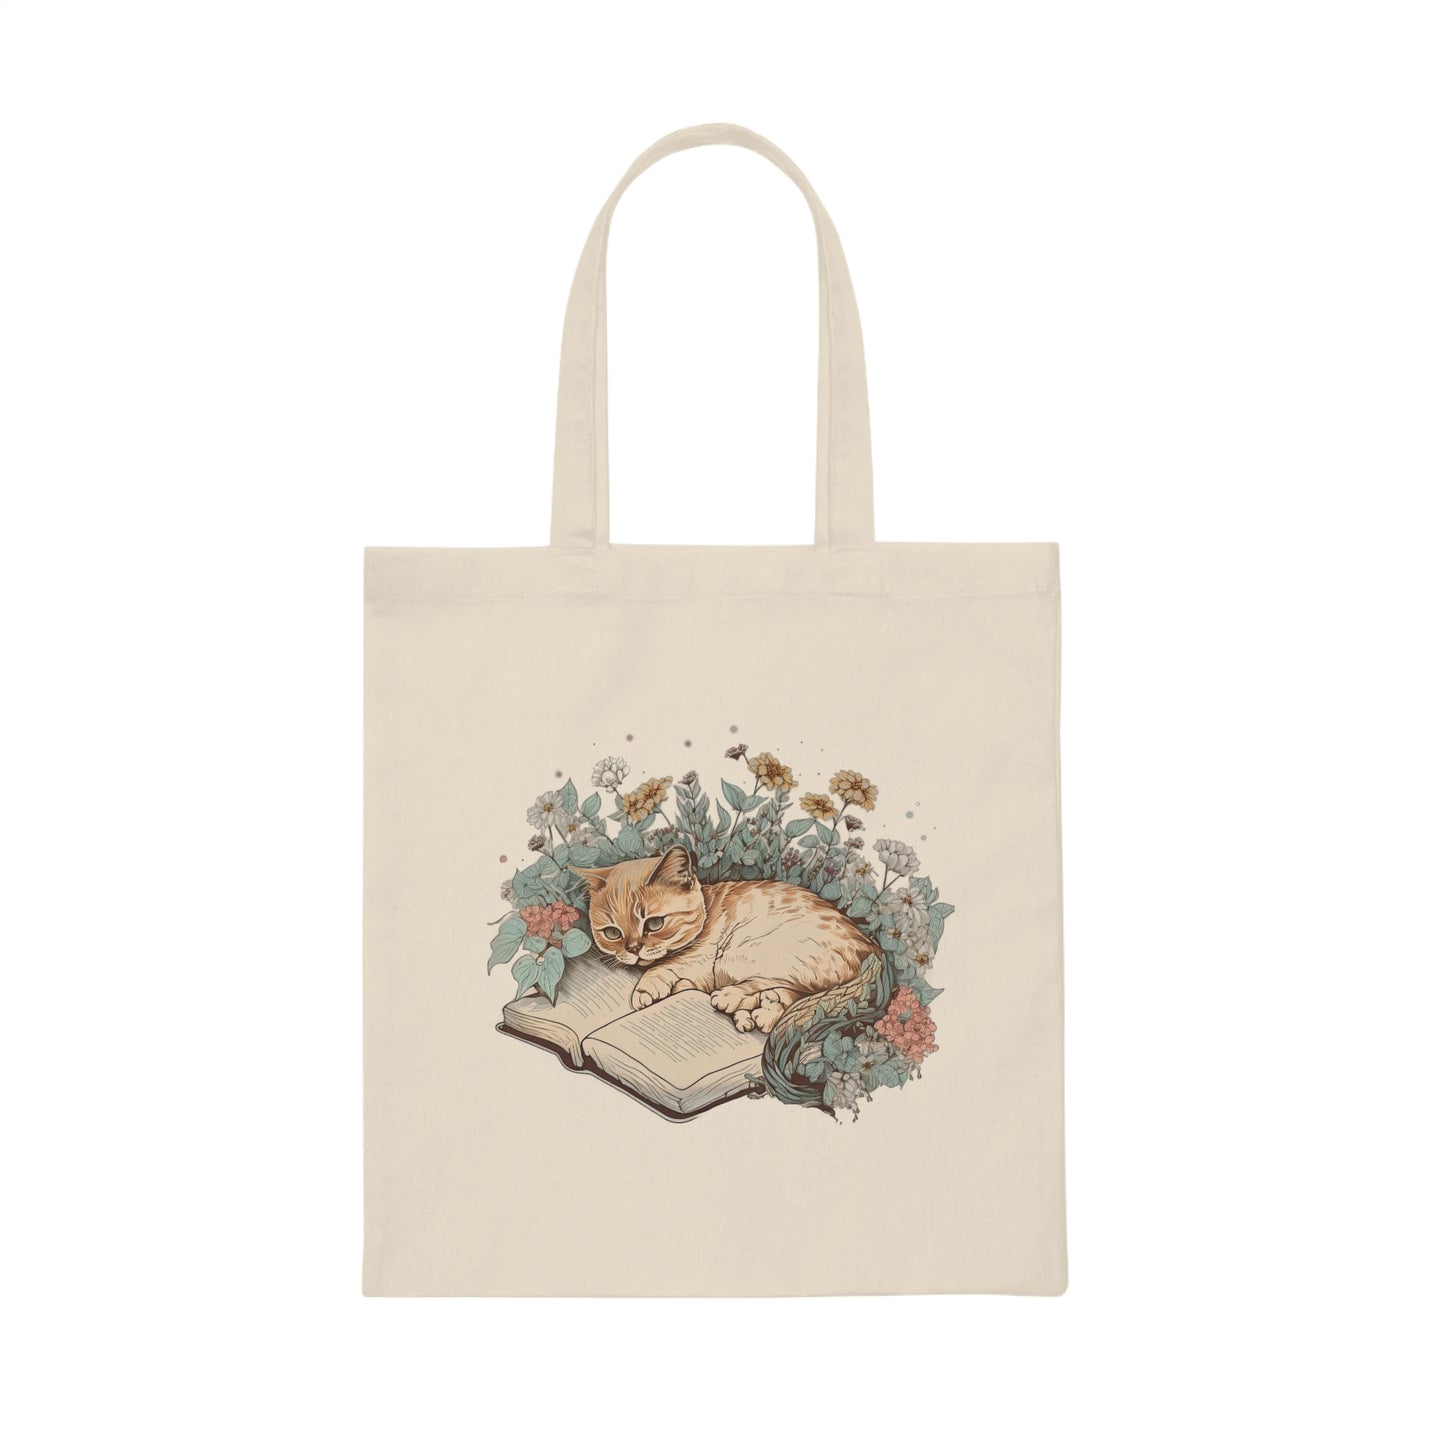 Cat Lover Tote Bag for Book Lovers, Cat on a Book, Gift For Her, Personalized Gifts, Cat Lovers, Floral Cat Design - Canvas Tote Bag